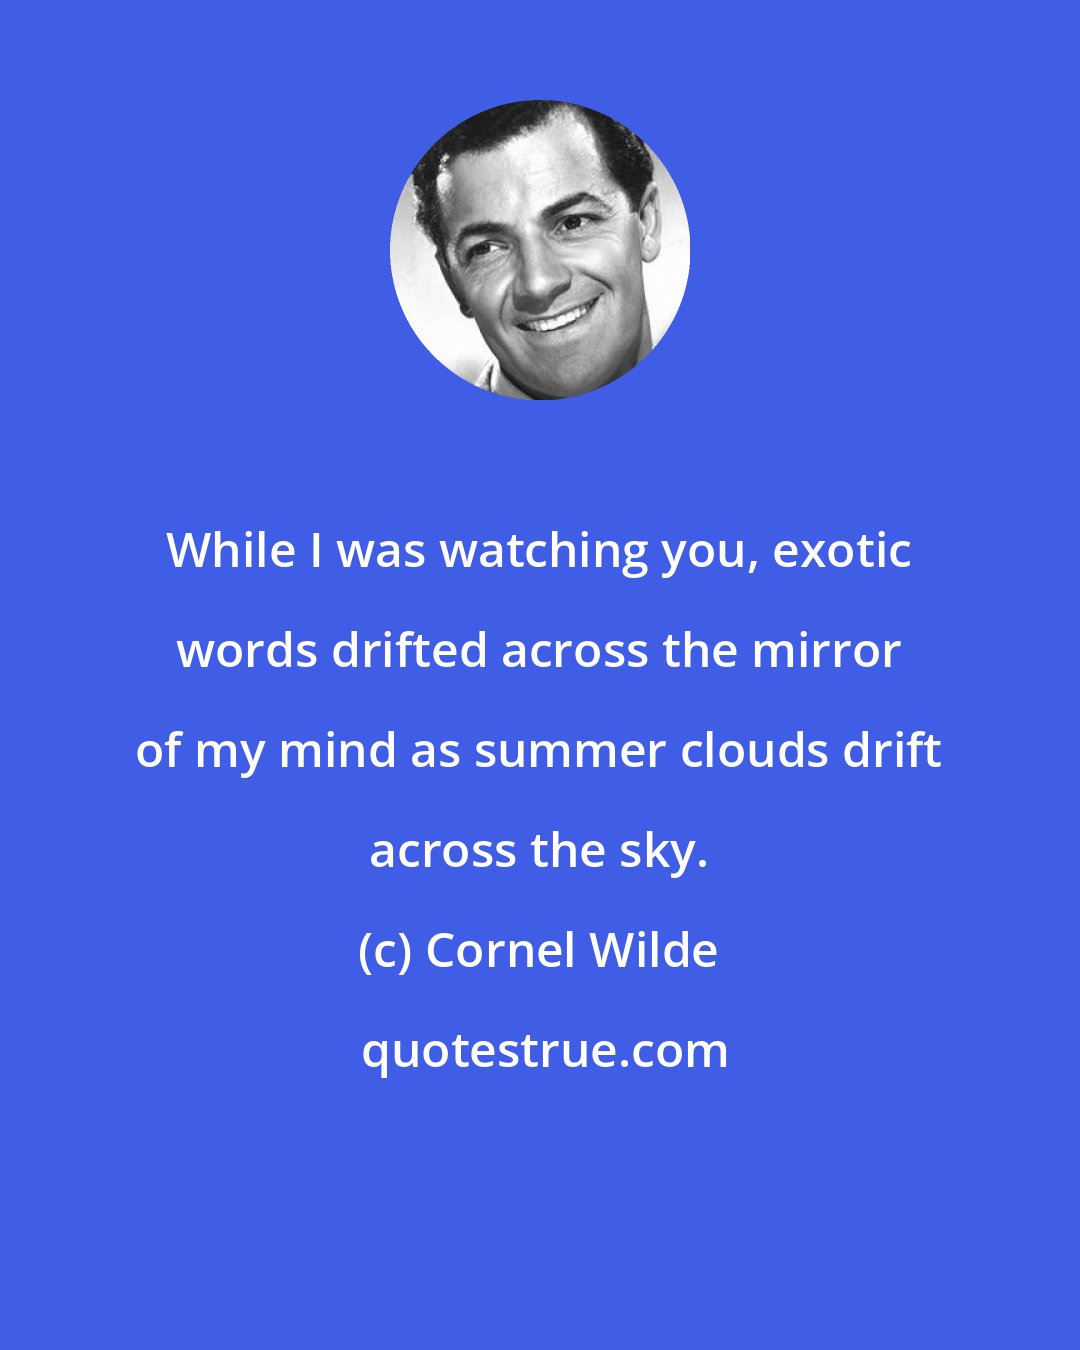 Cornel Wilde: While I was watching you, exotic words drifted across the mirror of my mind as summer clouds drift across the sky.